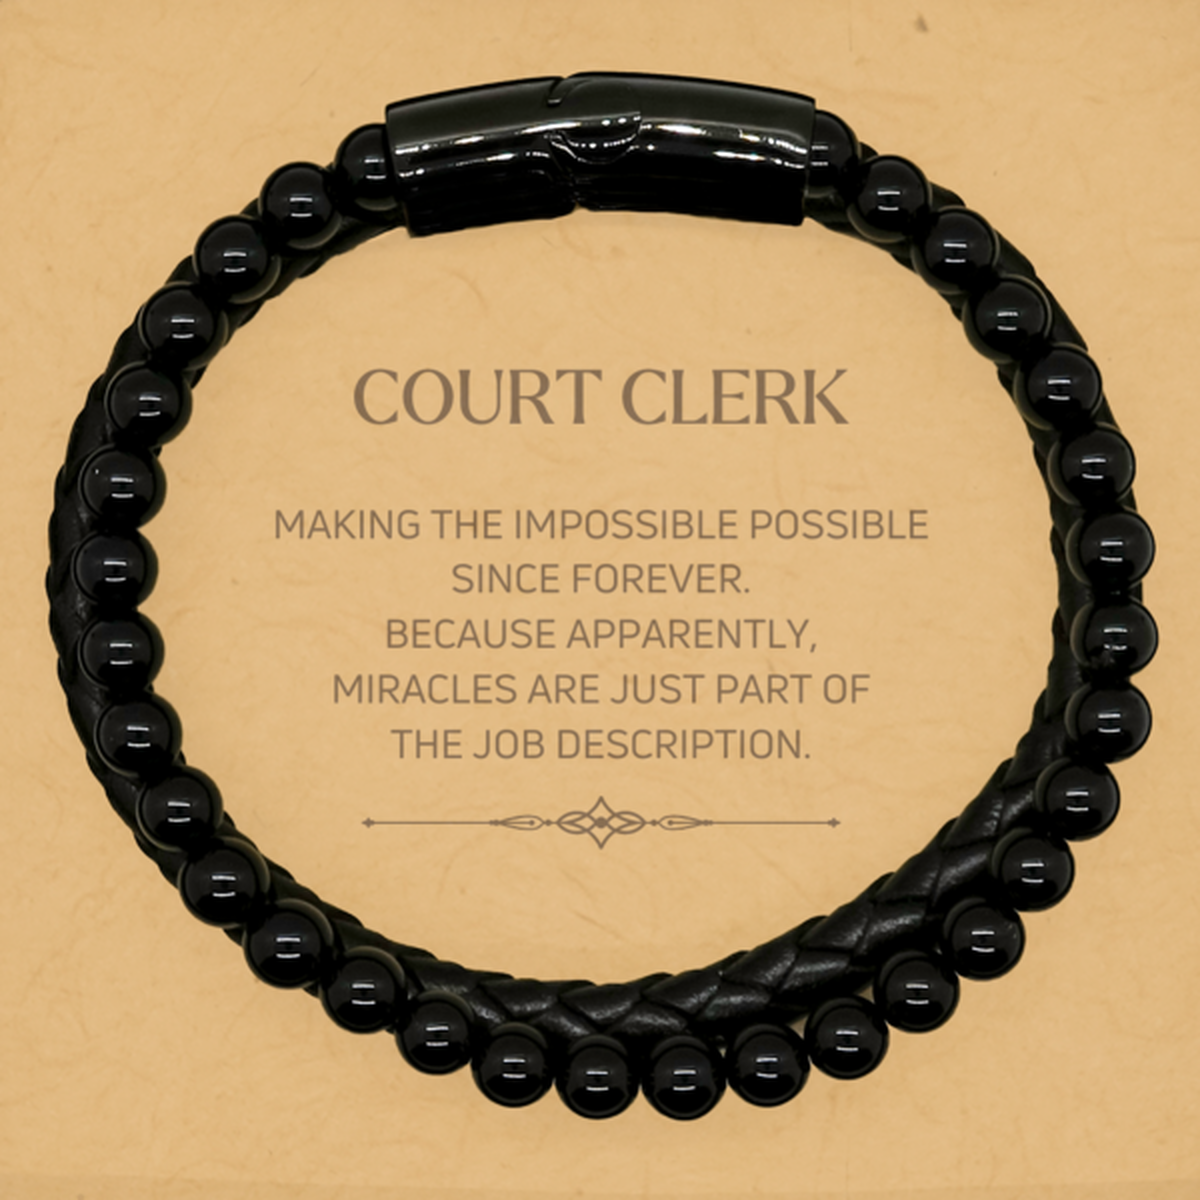 Funny Court Clerk Gifts, Miracles are just part of the job description, Inspirational Birthday Stone Leather Bracelets For Court Clerk, Men, Women, Coworkers, Friends, Boss